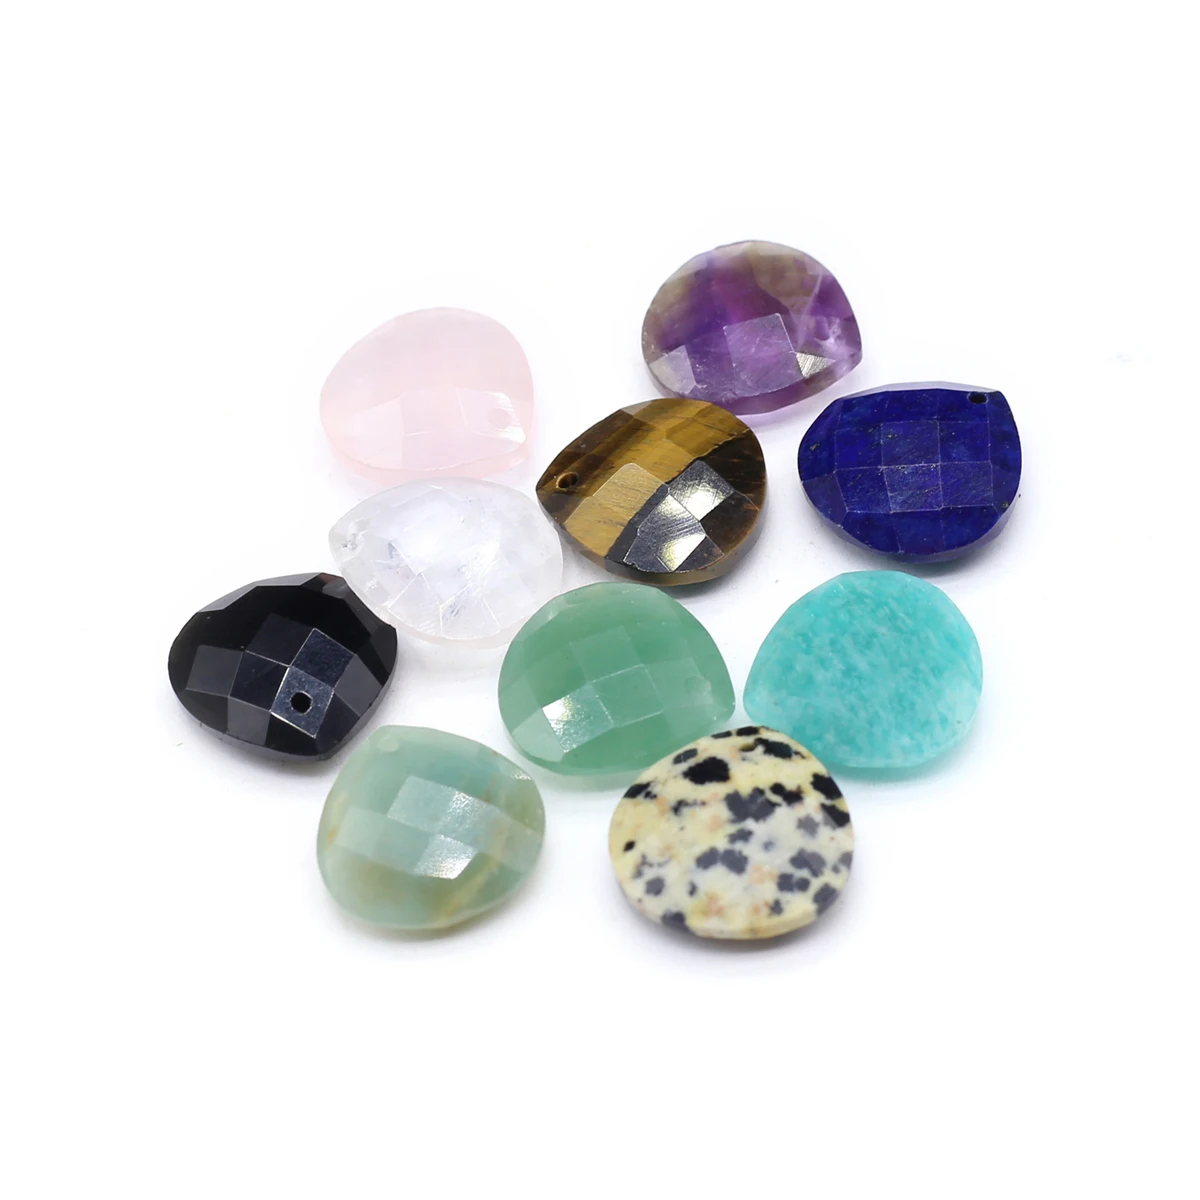 

5 Pcs Water Drop Shape Faceted Random Healing Crystal Stone Pendants Agate Charms for Making Jewelry Necklace Gift